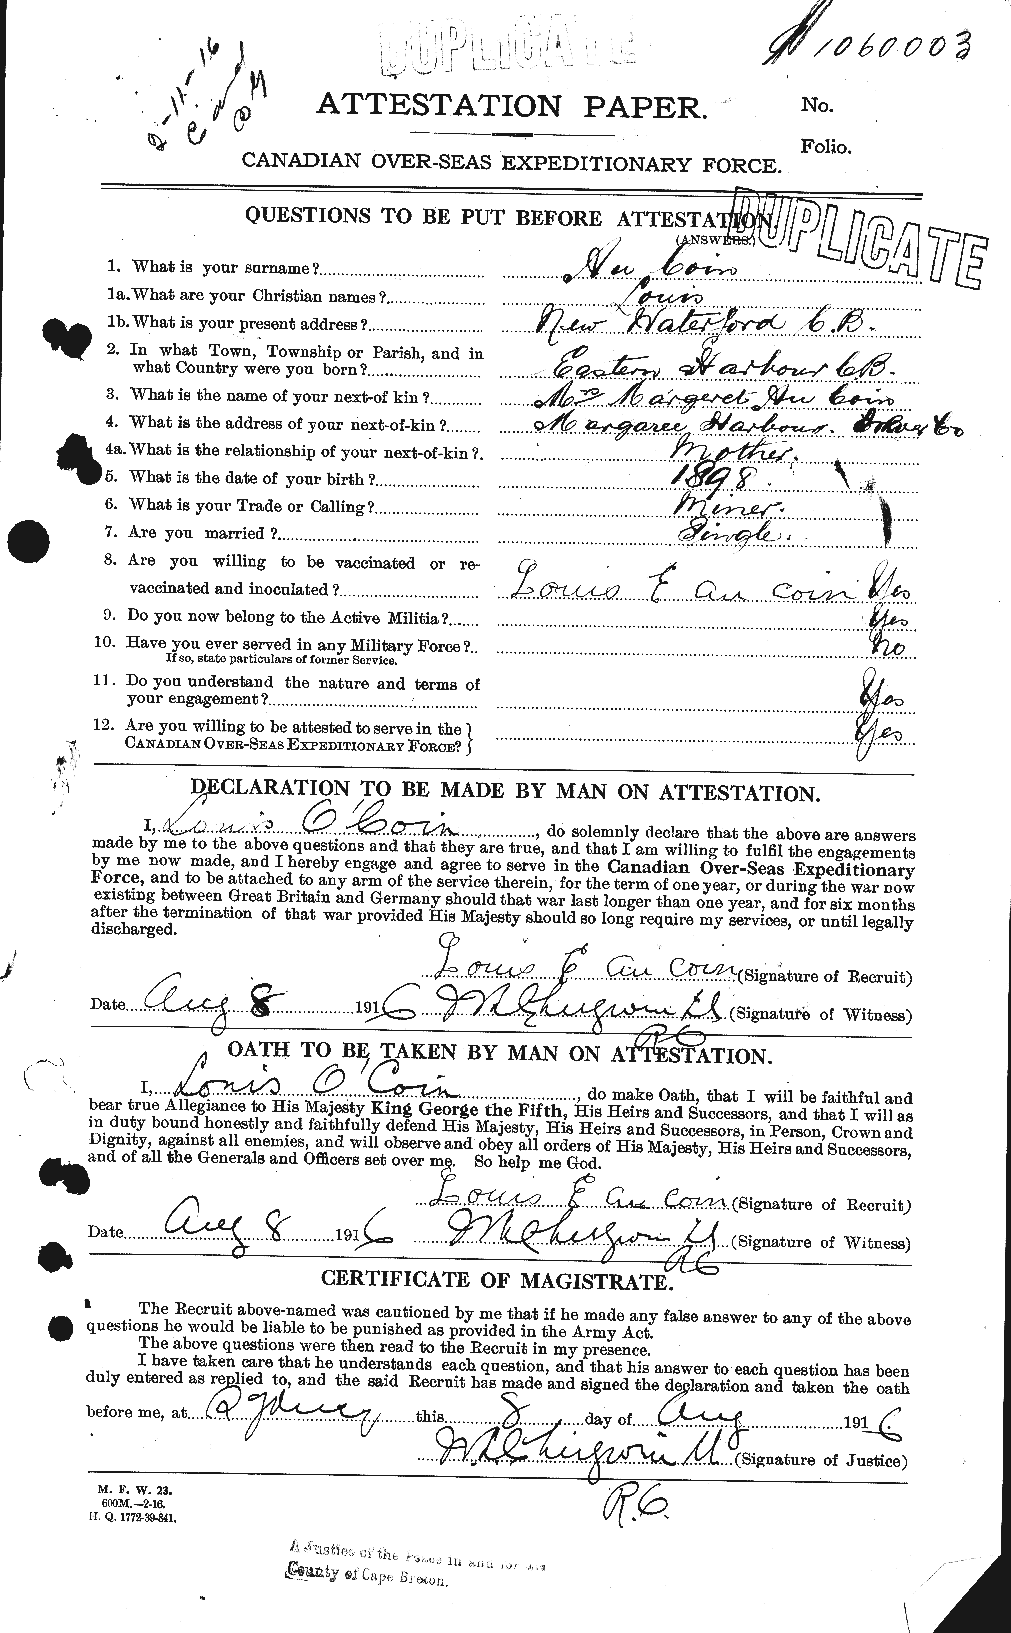 Personnel Records of the First World War - CEF 224543a